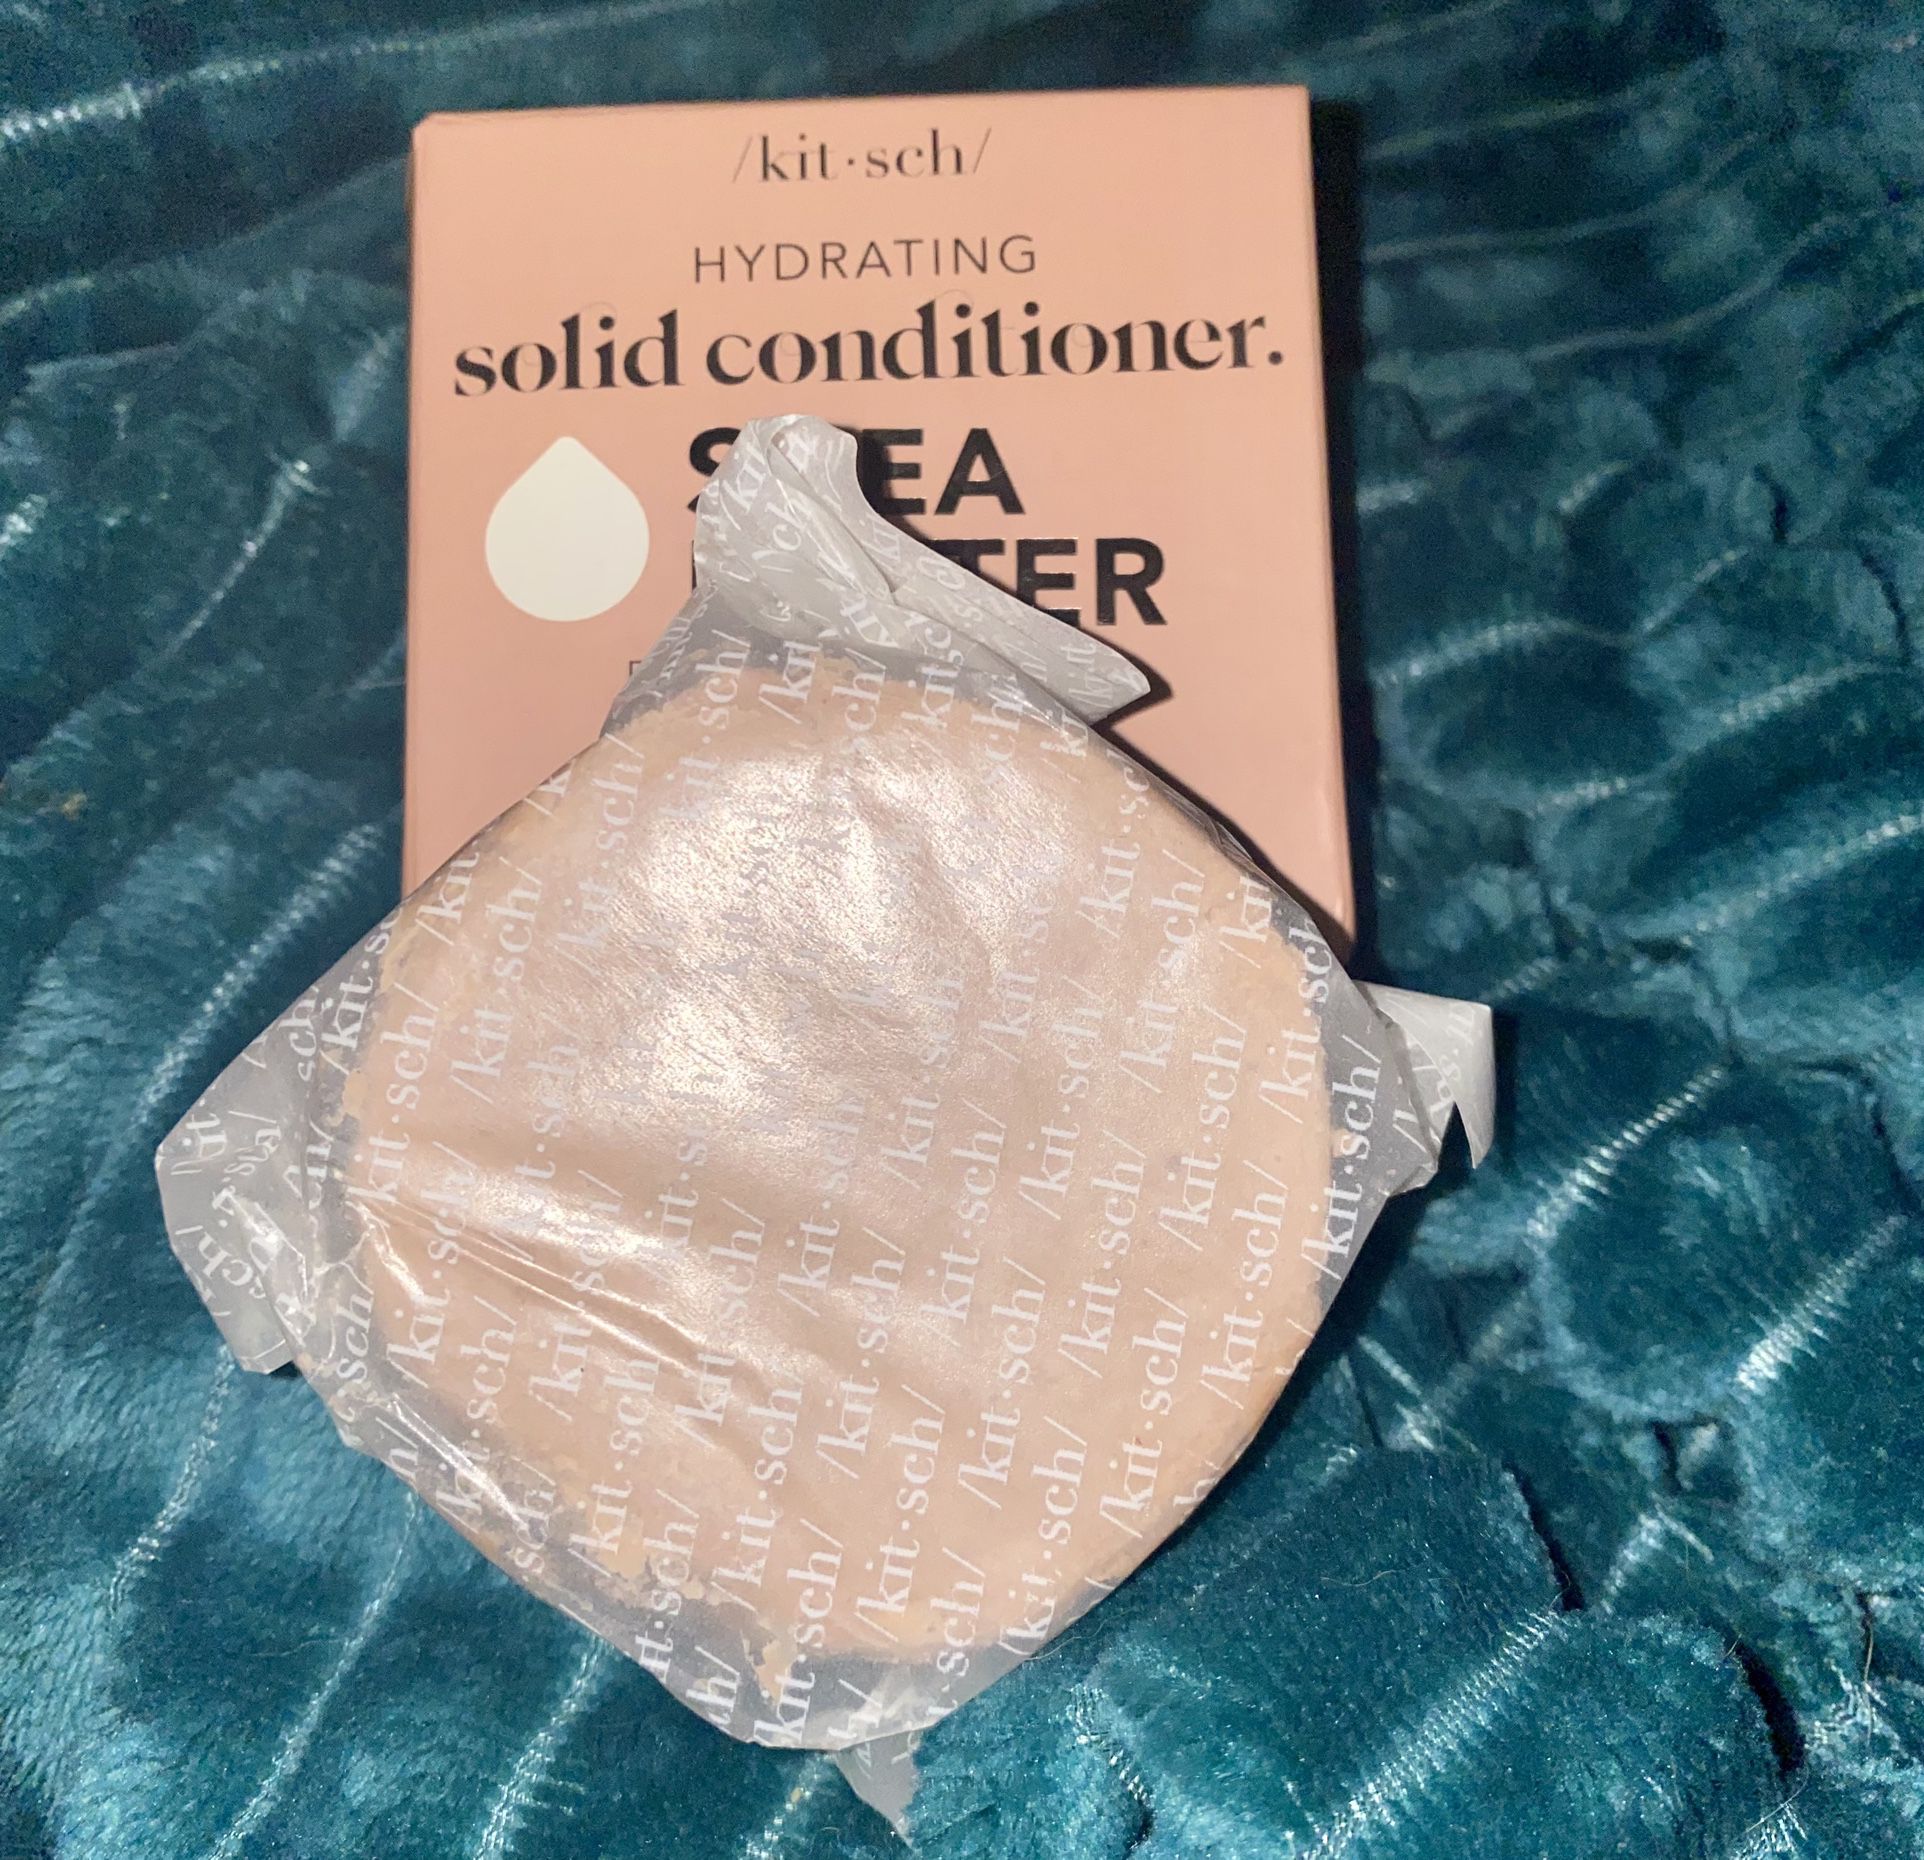 Kit•sch Hydrating Shea Butter Conditioner Bar